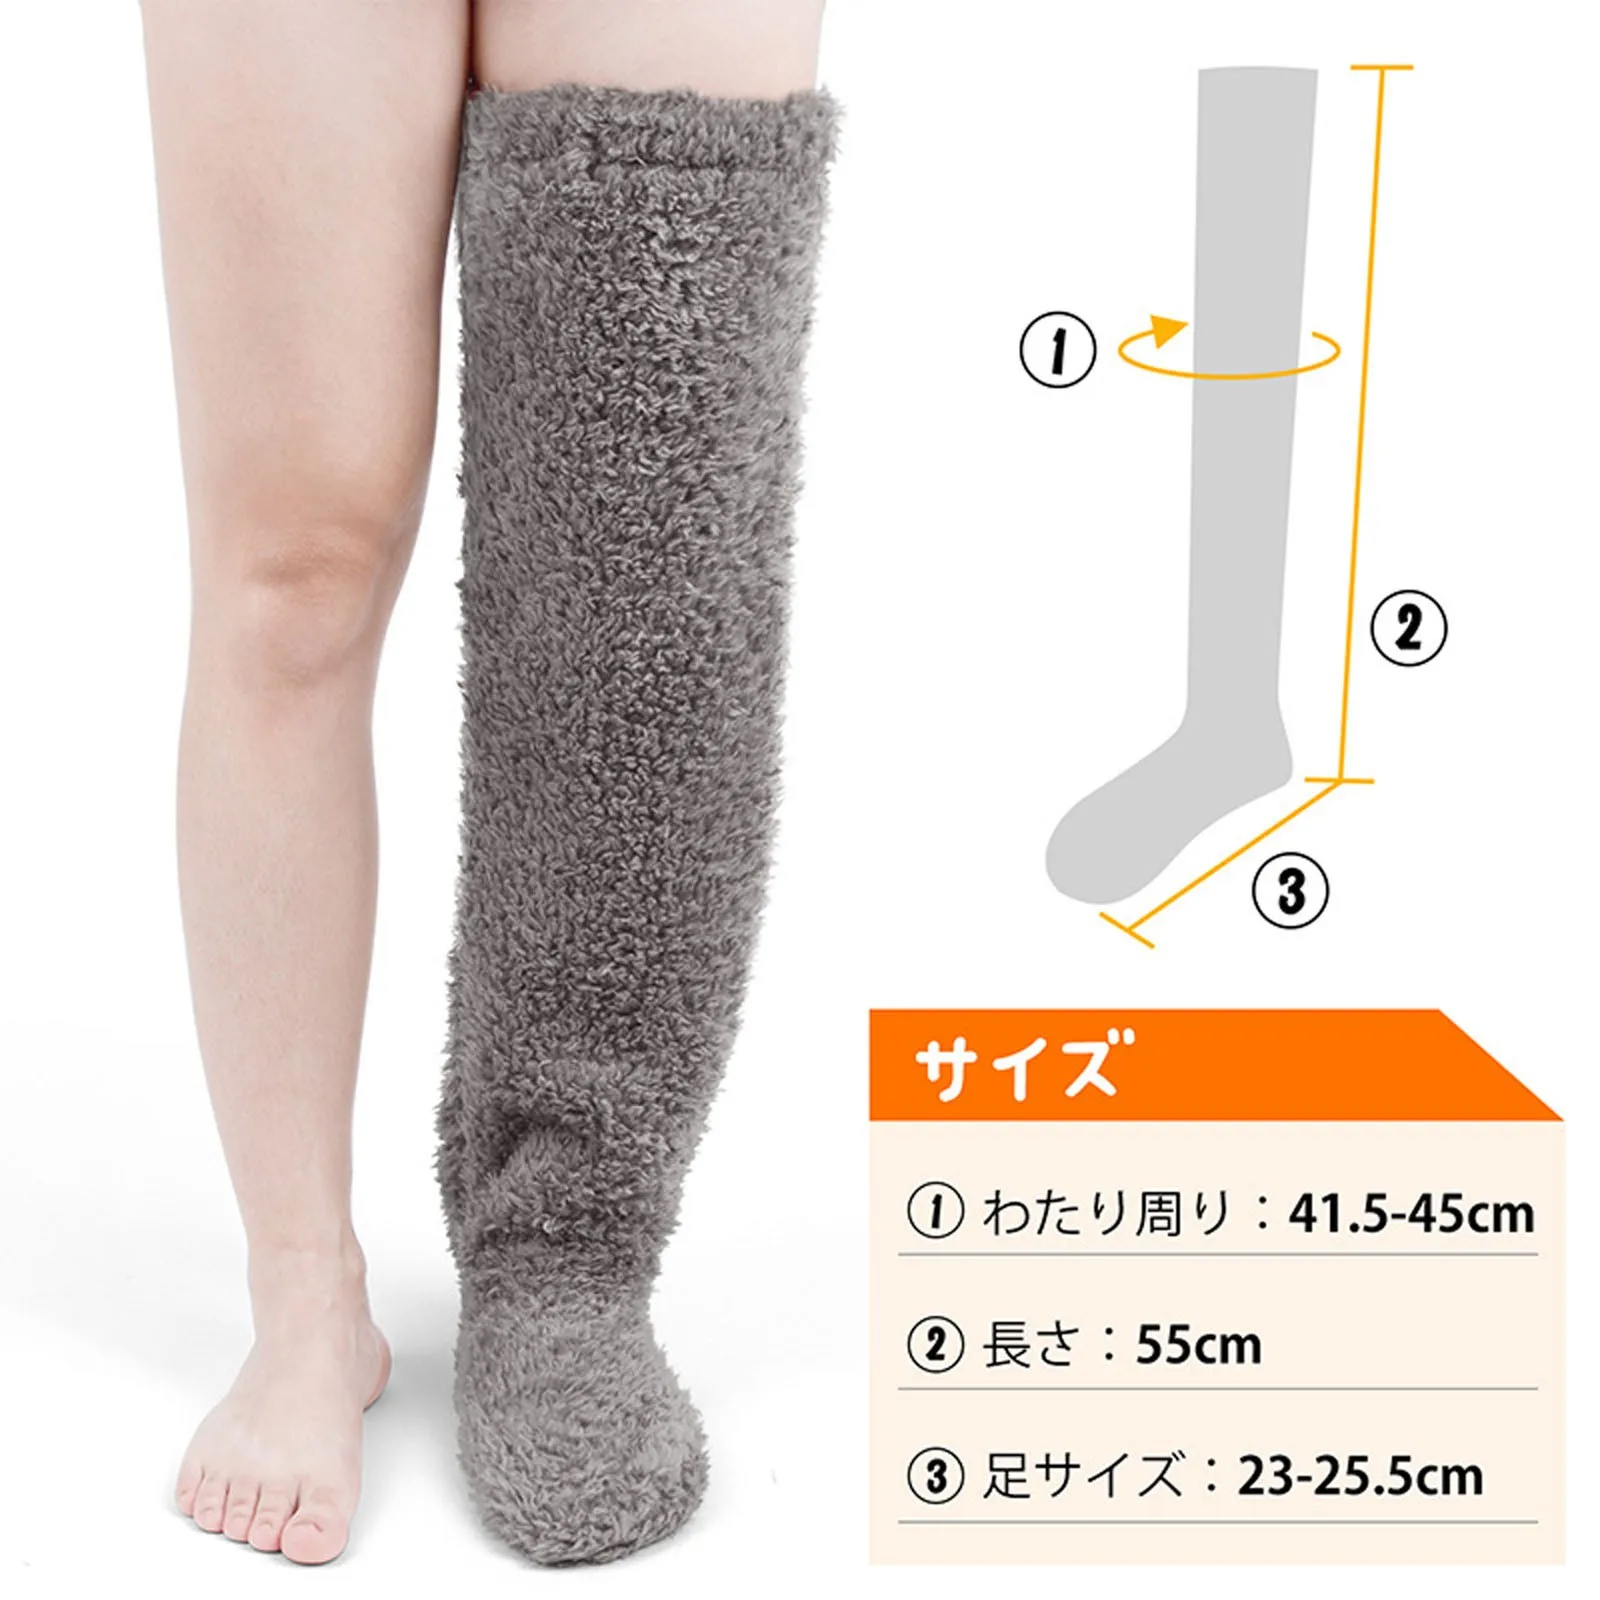 Fluffy Leg Warmers Stocking Winter Warm Leg Cover Home Over Knee Socks Thick Woolen Pants Leg Warmers Bed Long Socks Slippers images - 6